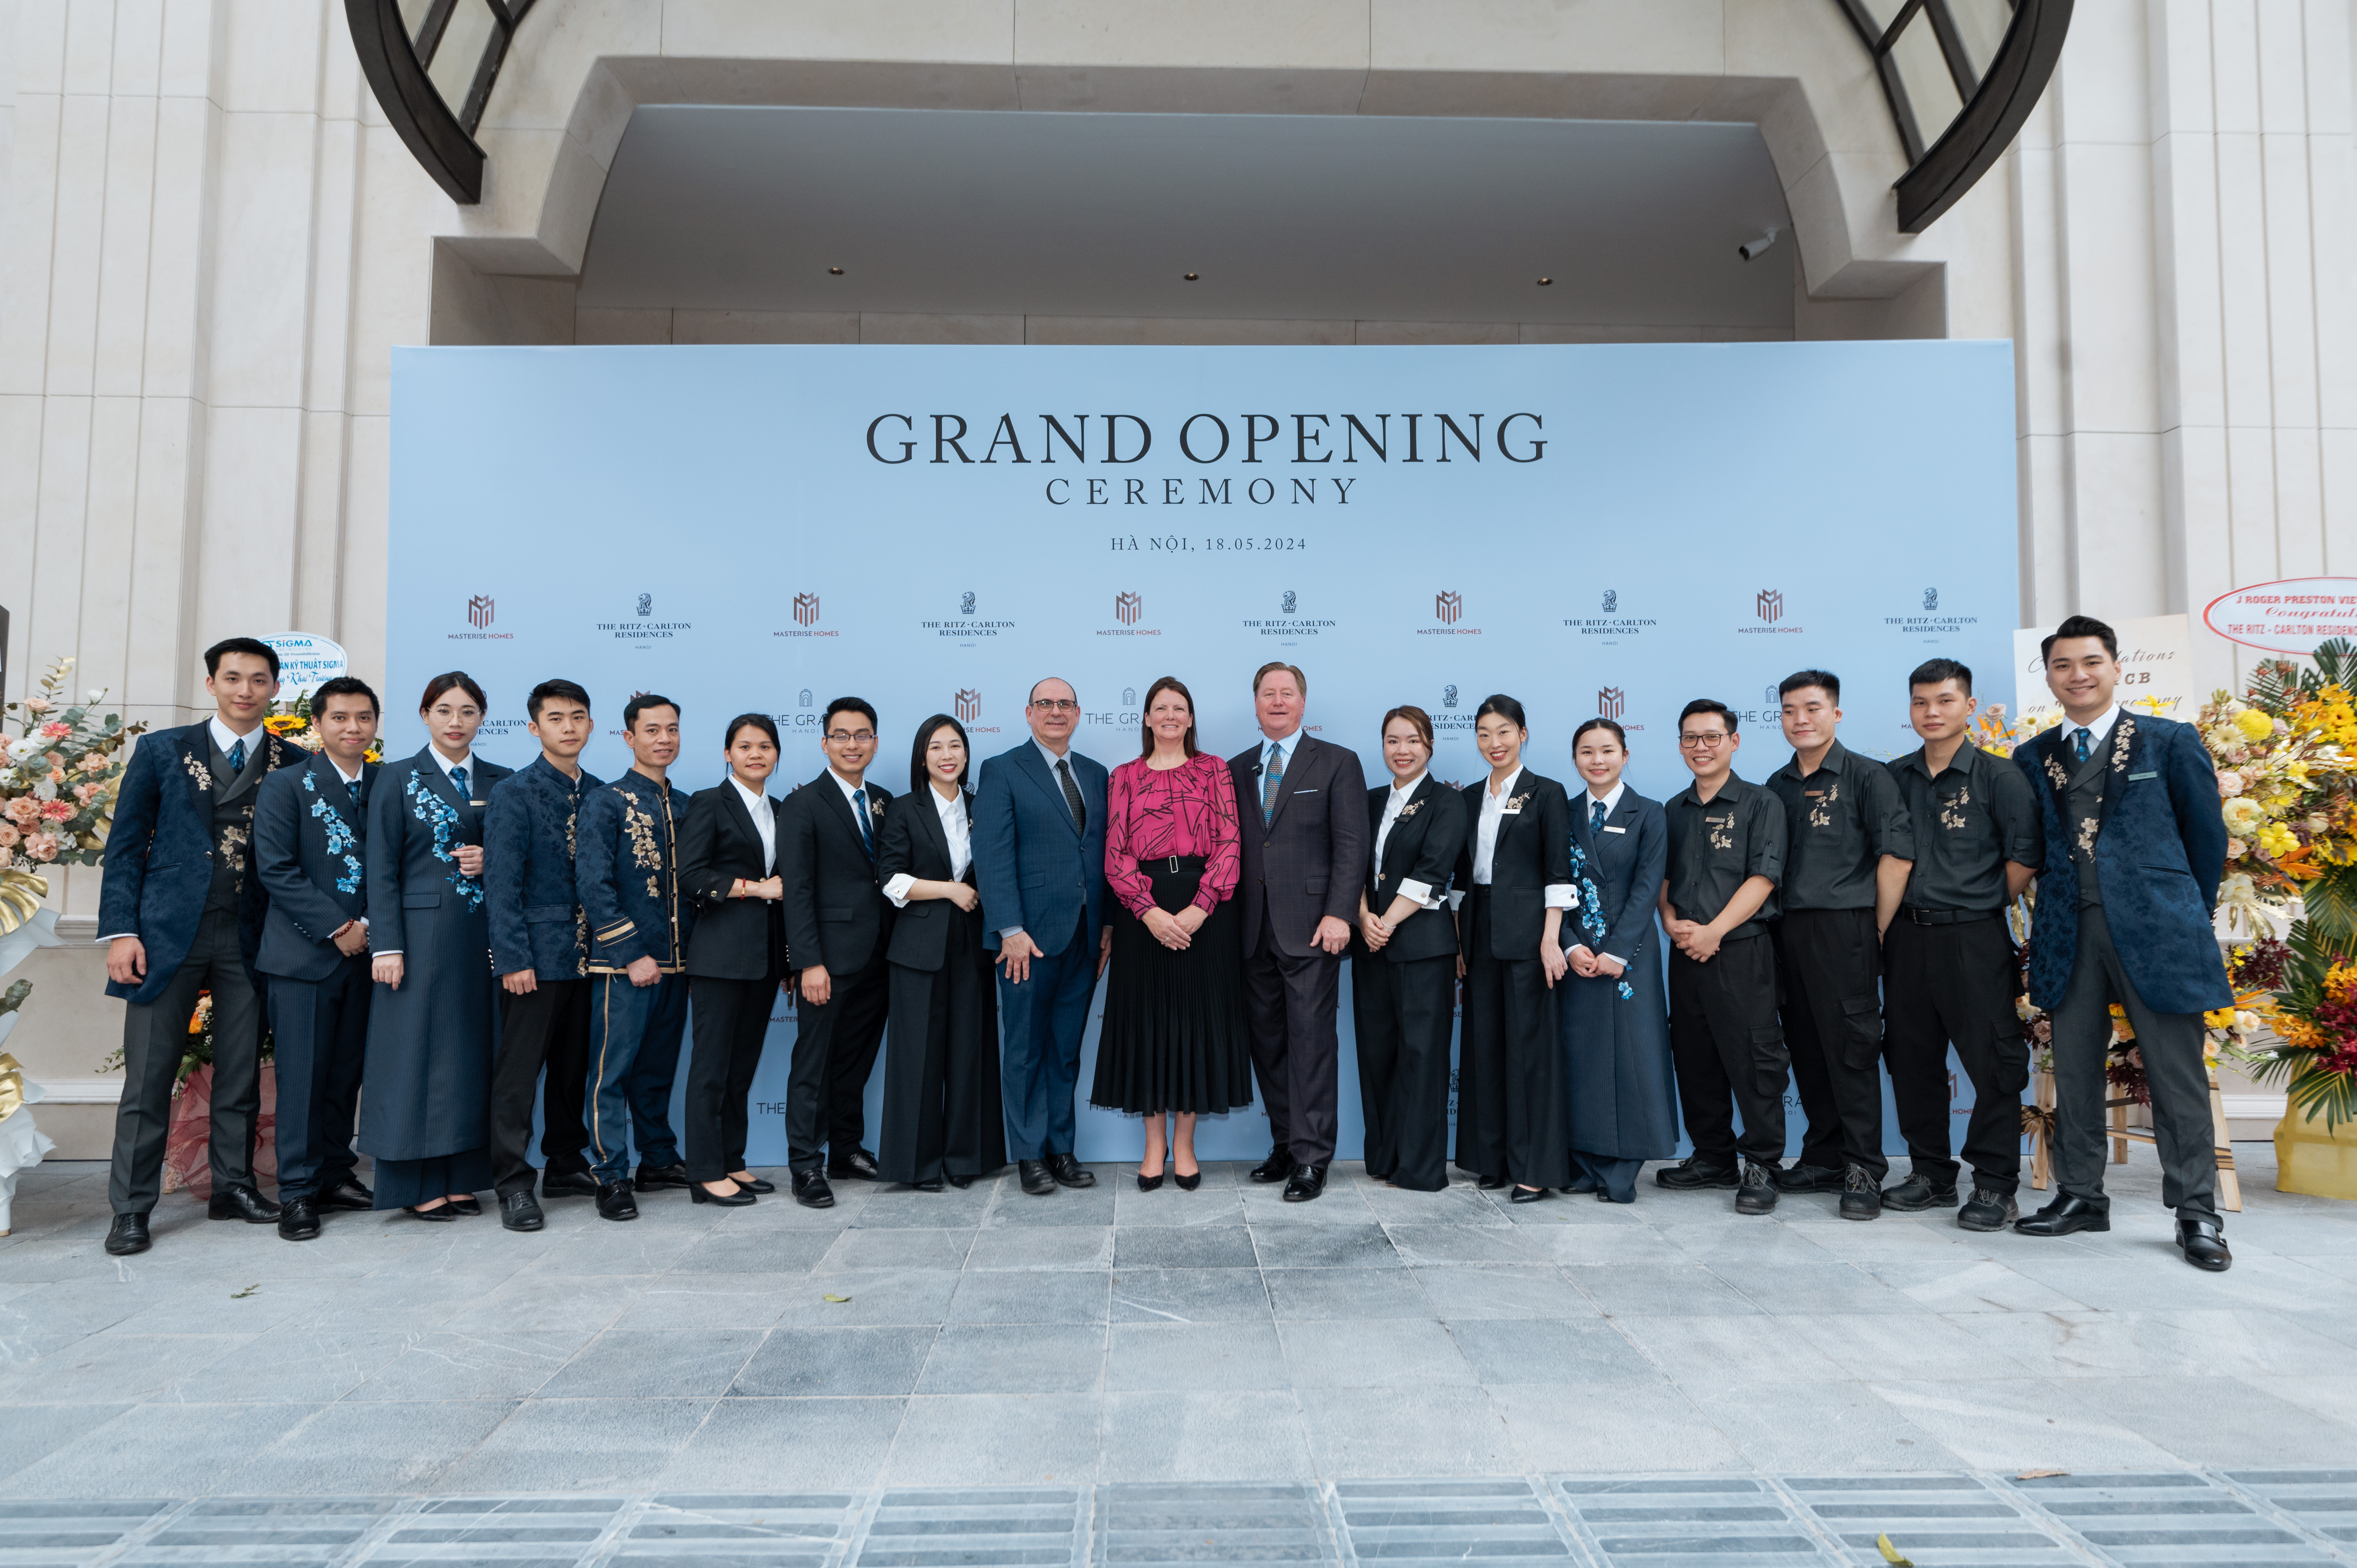 The Ritz-Carlton Ladies and Gentleman with senior executives of Marriott International at the grand opening ceremony. Photo: Masterise Homes